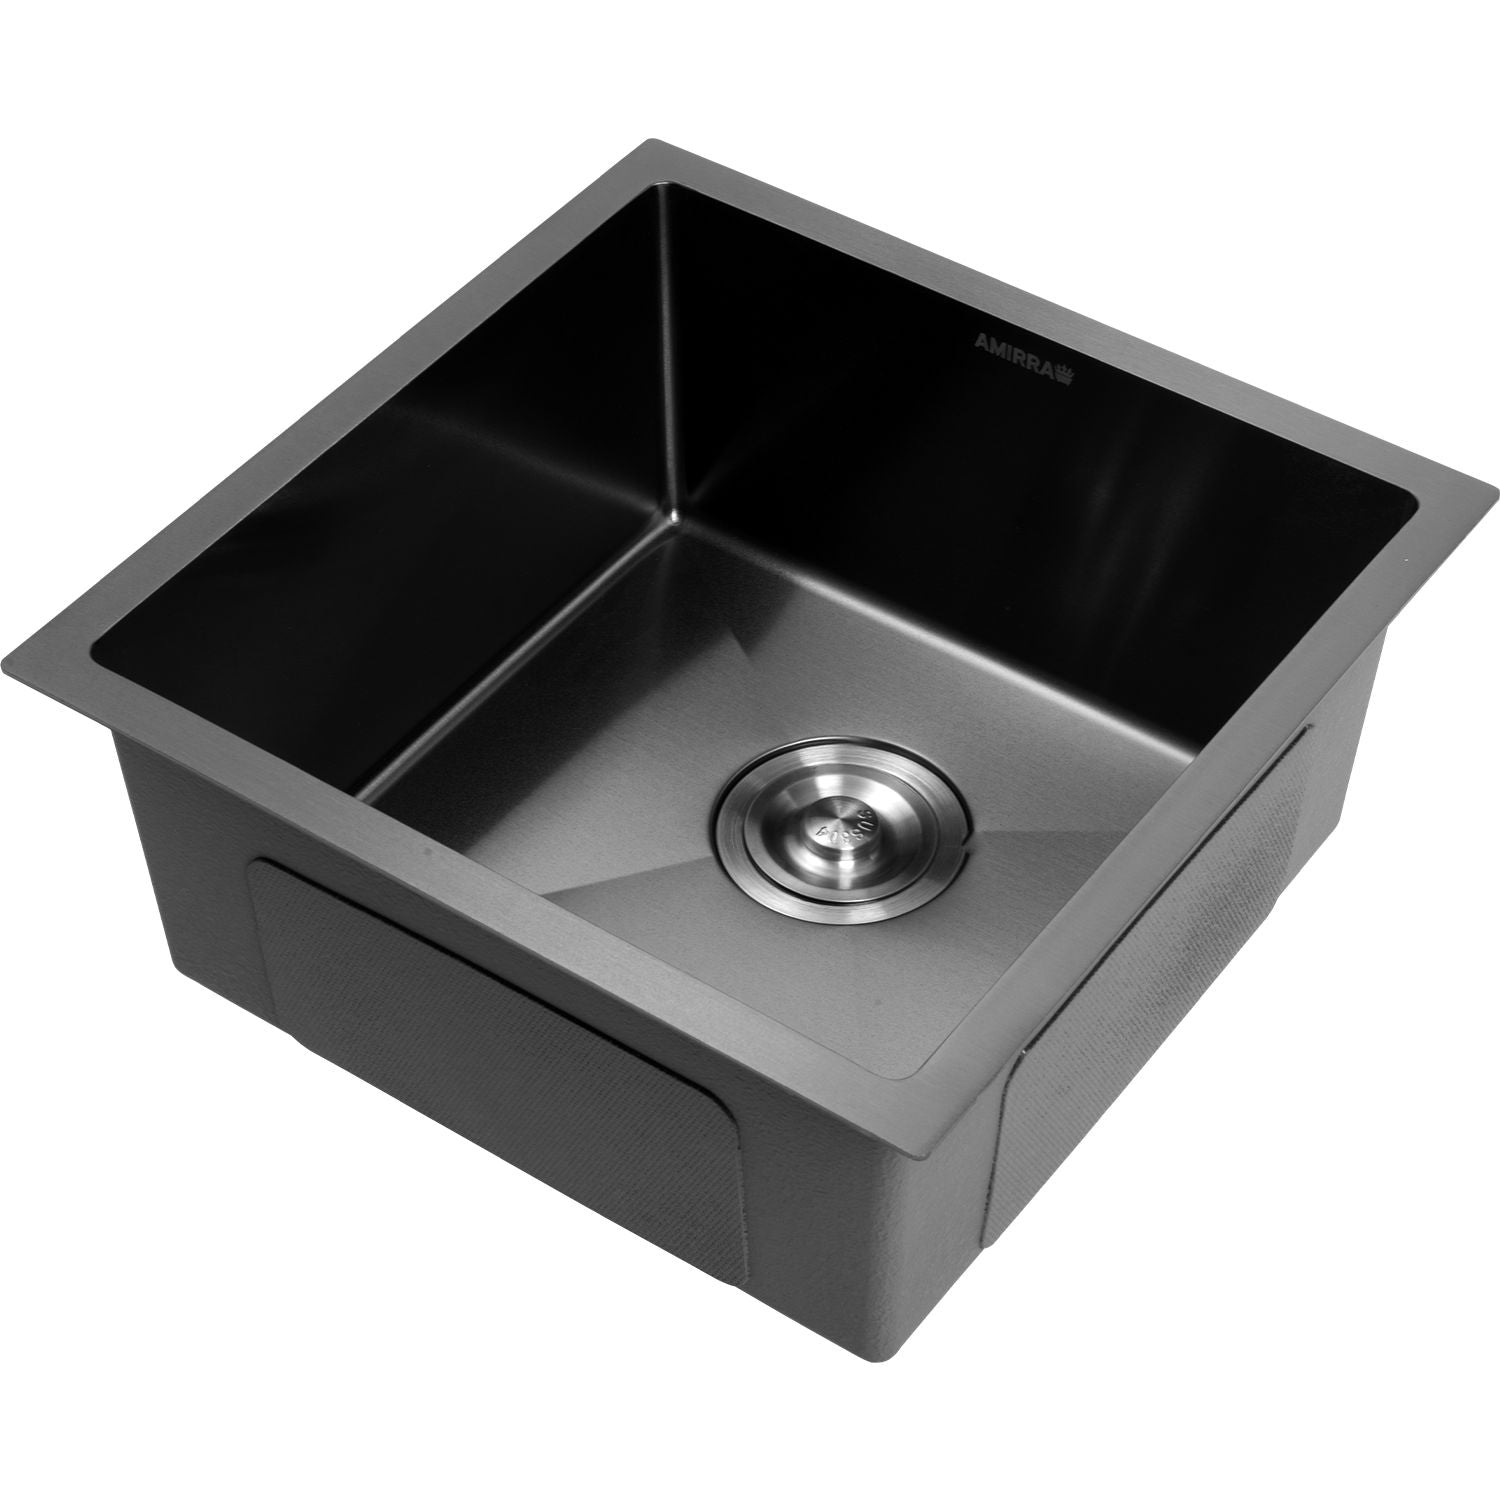 AMIRRA Kitchen Stainless Steel Sink 440mm x 440mm with Nano Coating (Silver Black)